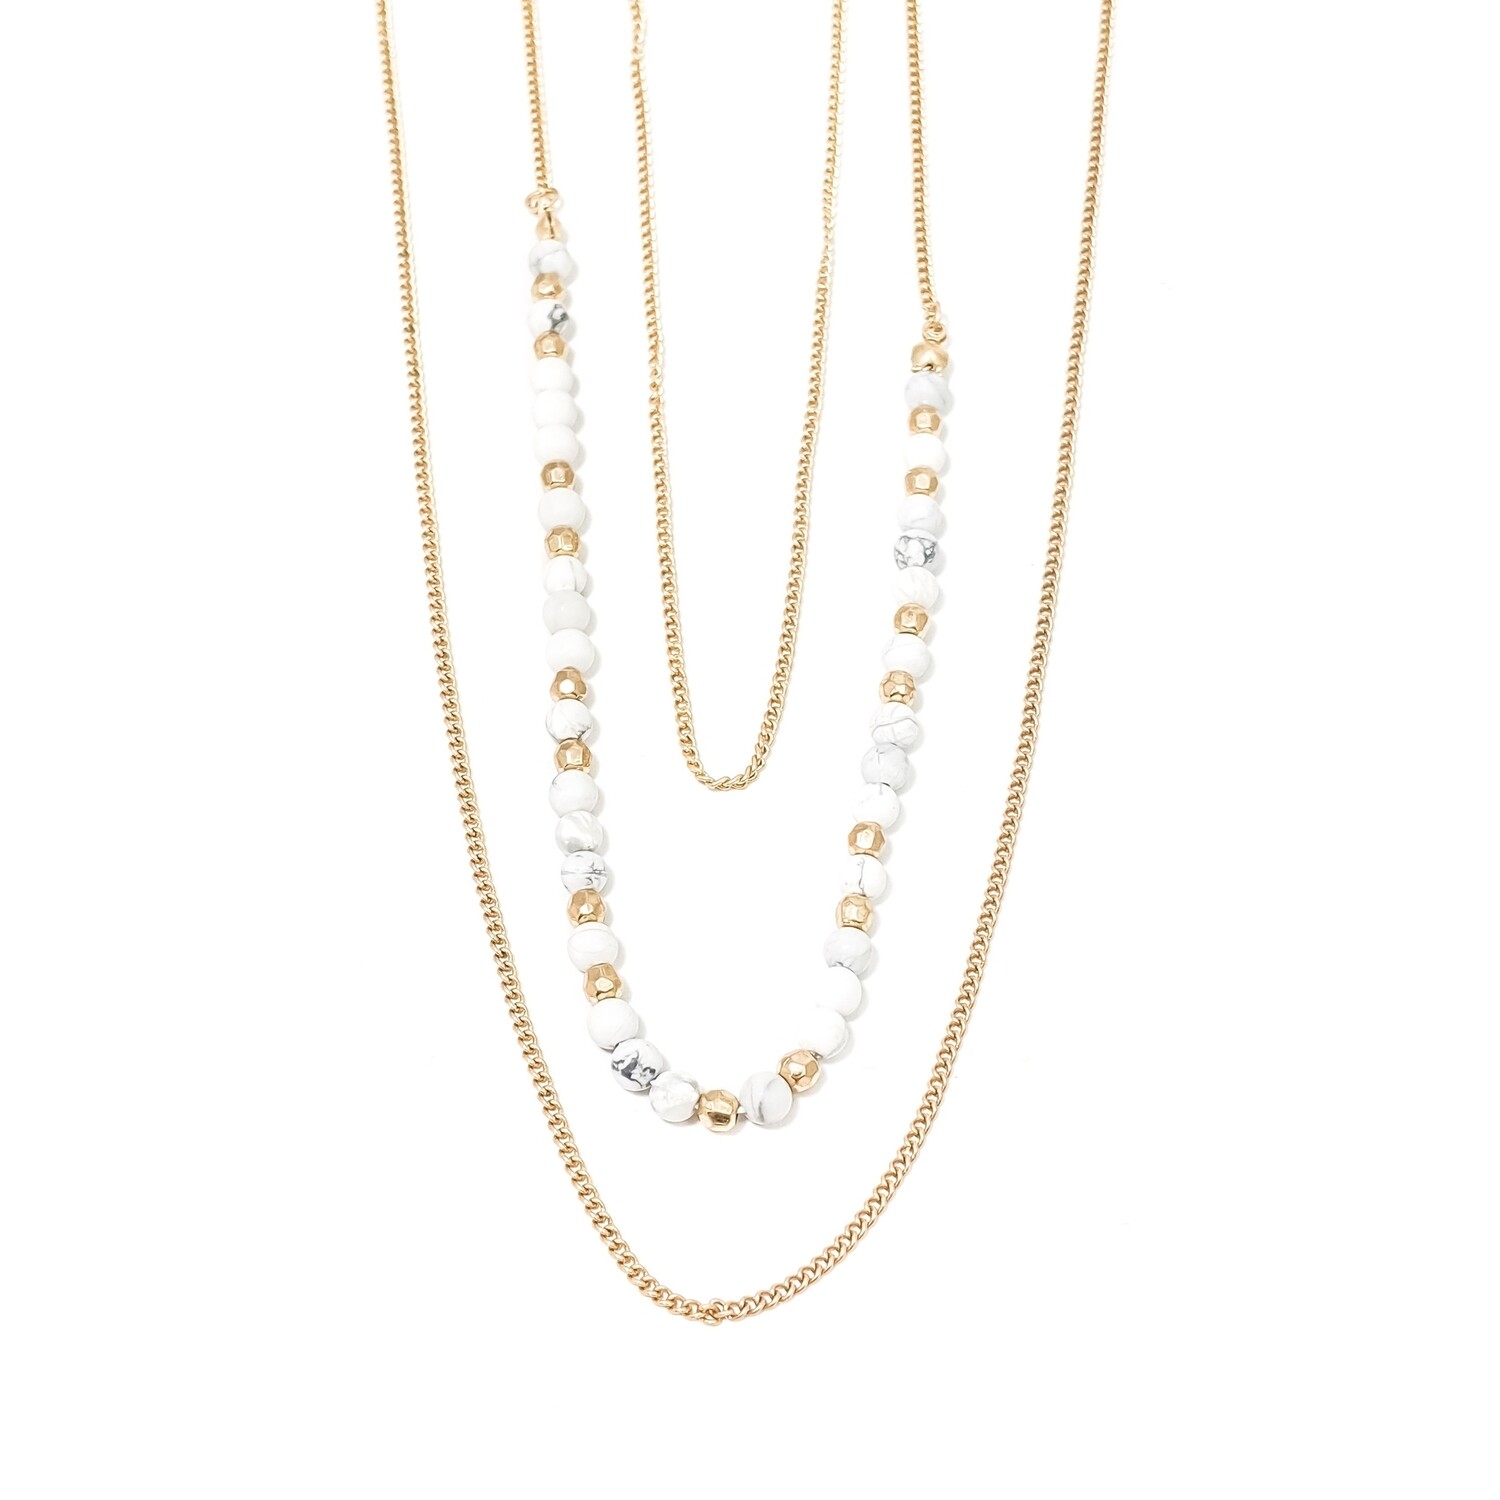 White Gray & Gold Beaded Chain Necklace